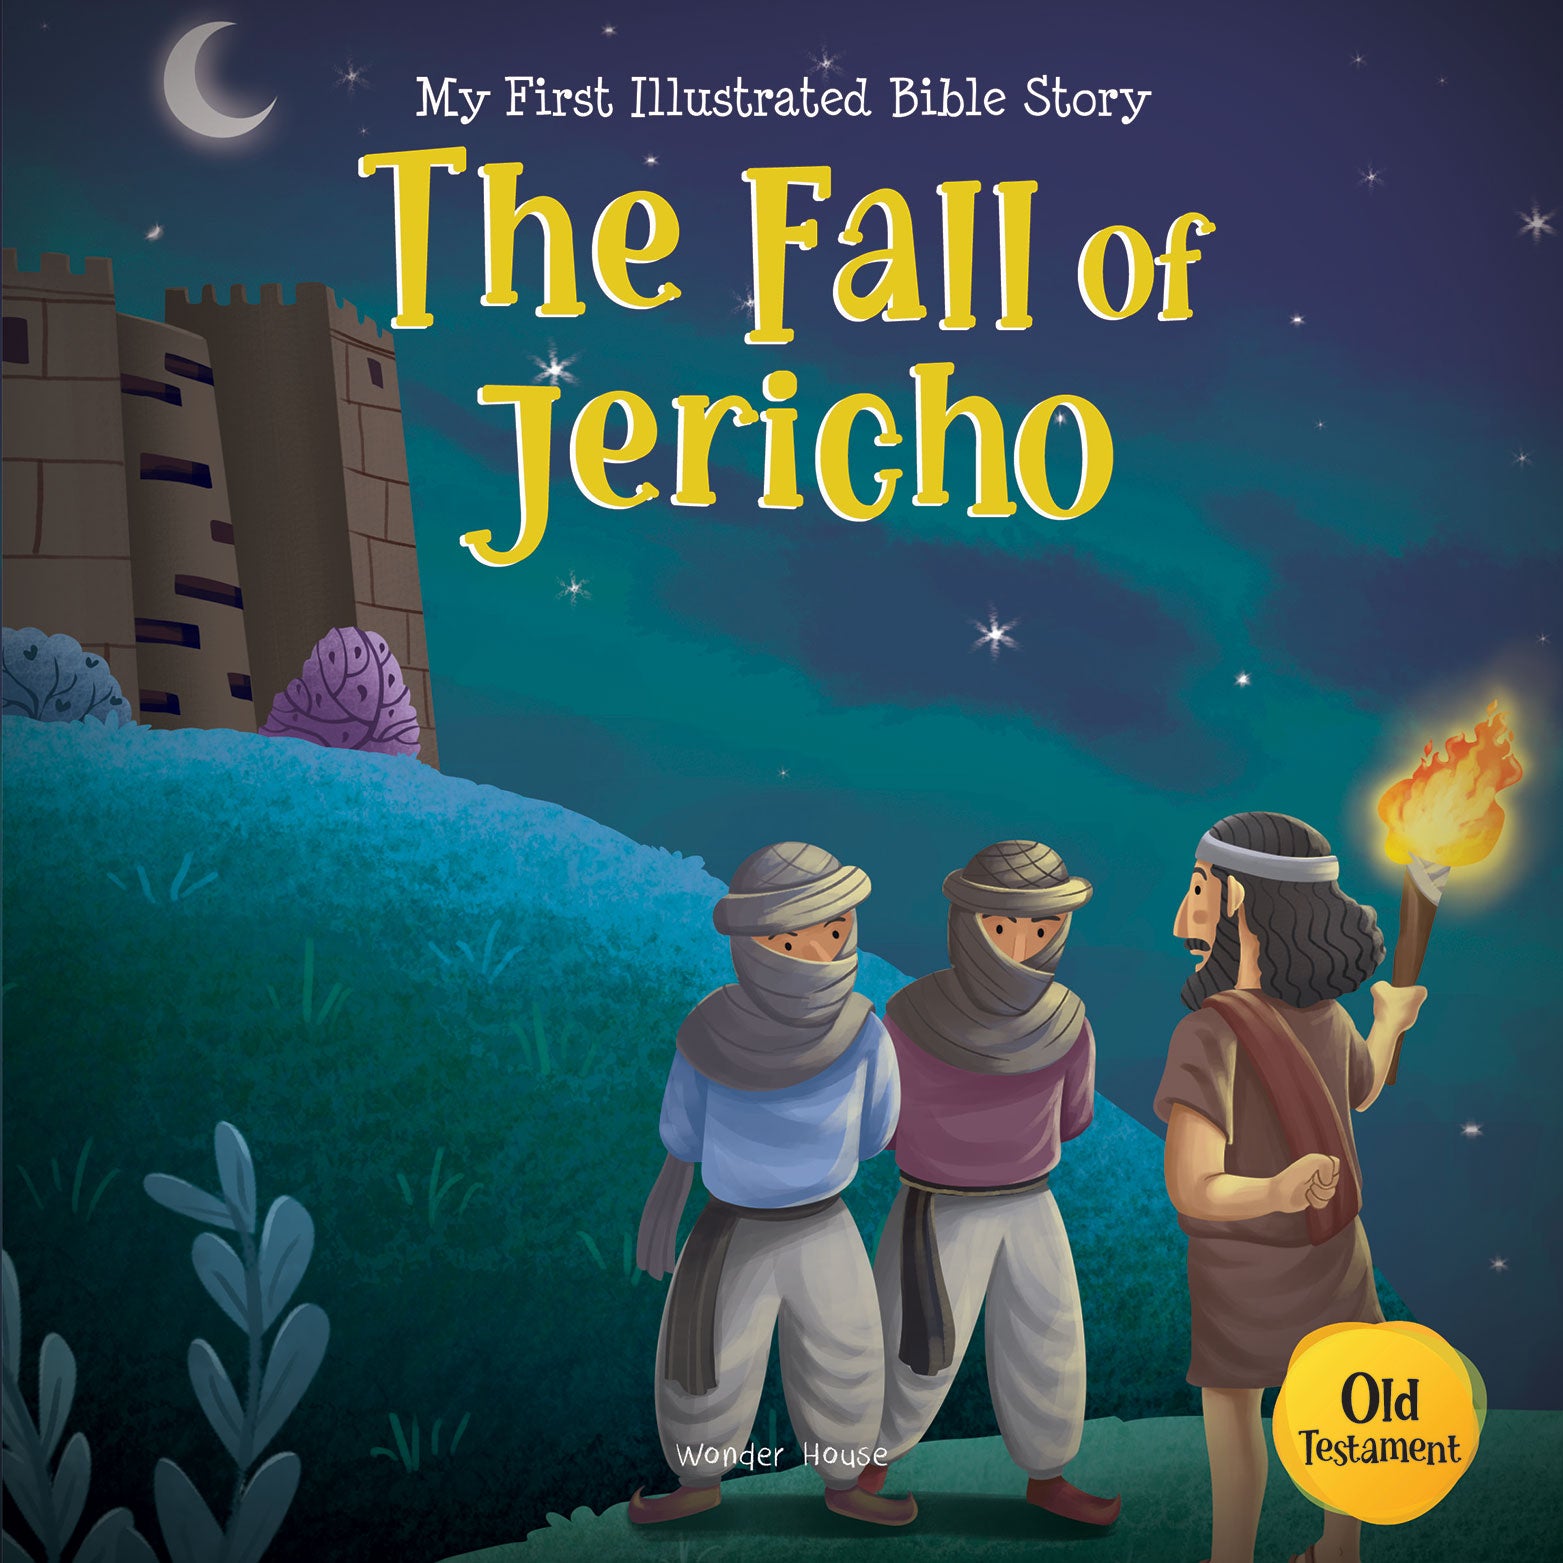 My First Illustrated Bible Story: The Fall of Jericho